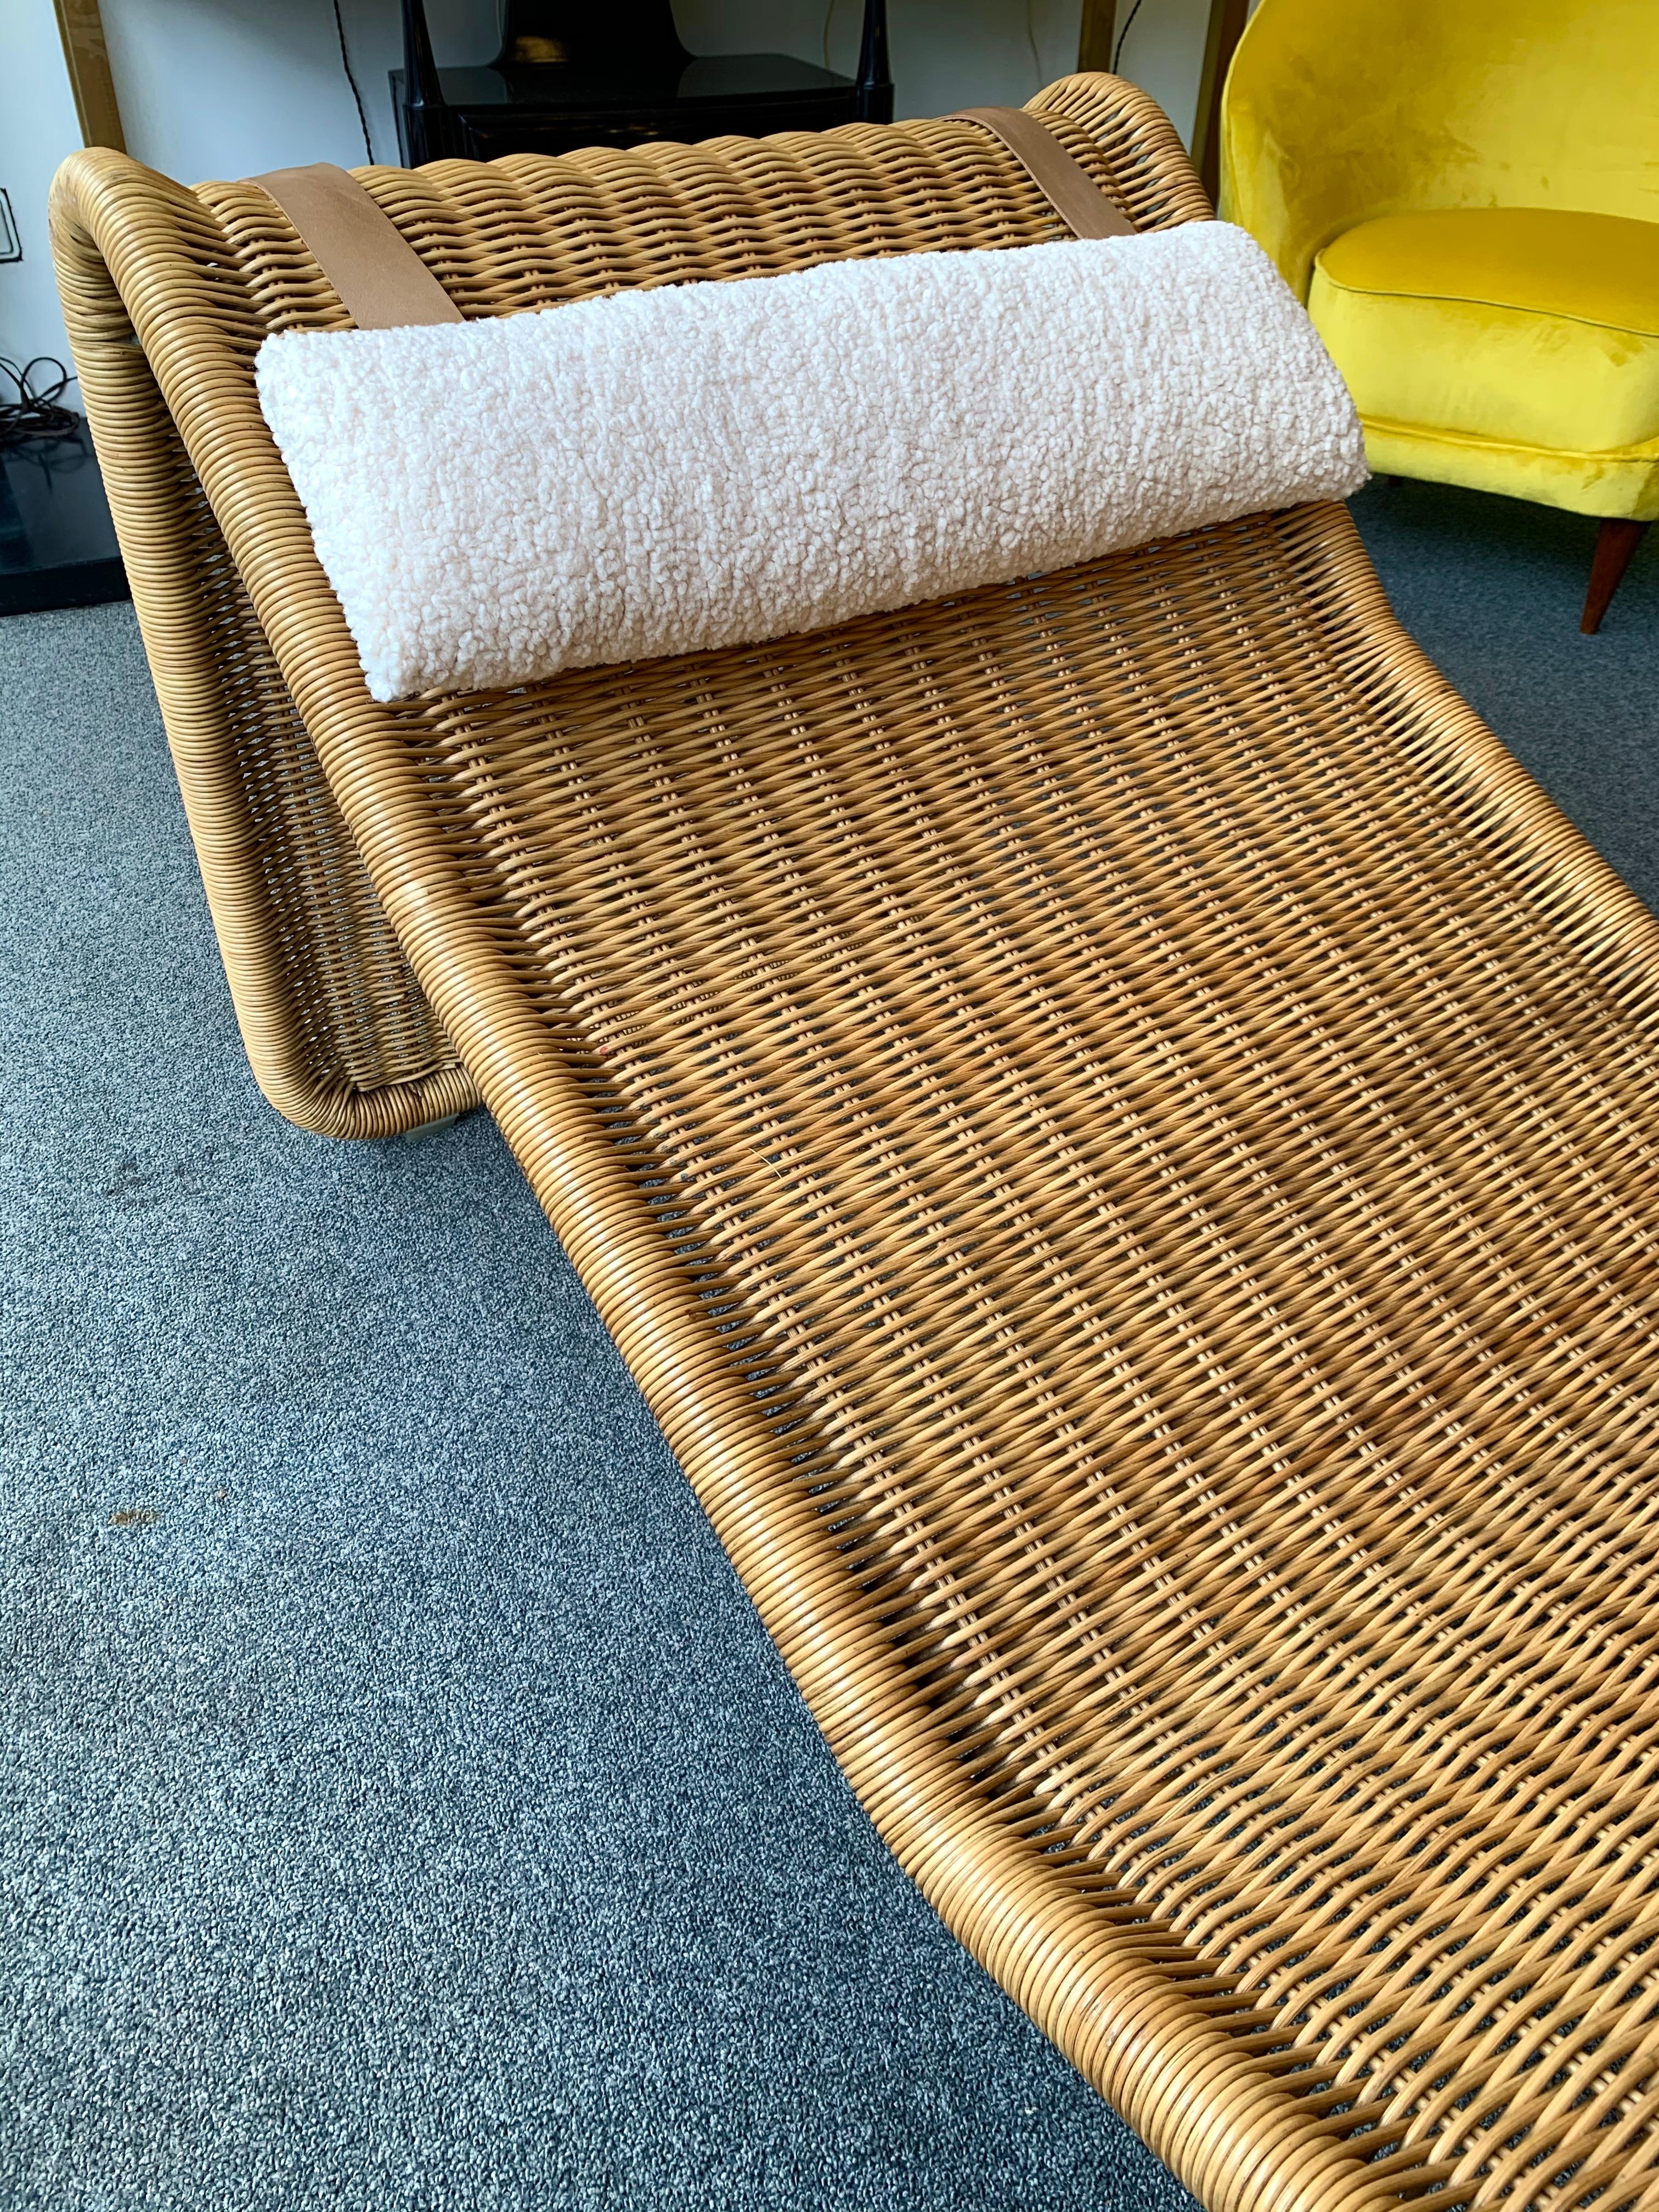 Braid rattan chaise lounge lounger chair a rare variant of model P3 by the designer Tito Agnoli for the editor Bonacina. Bouclé fabric and leather head cushion, with brass button. Famous design like Gio Ponti, Gianfranco Frattini, Cassina, Osvaldo